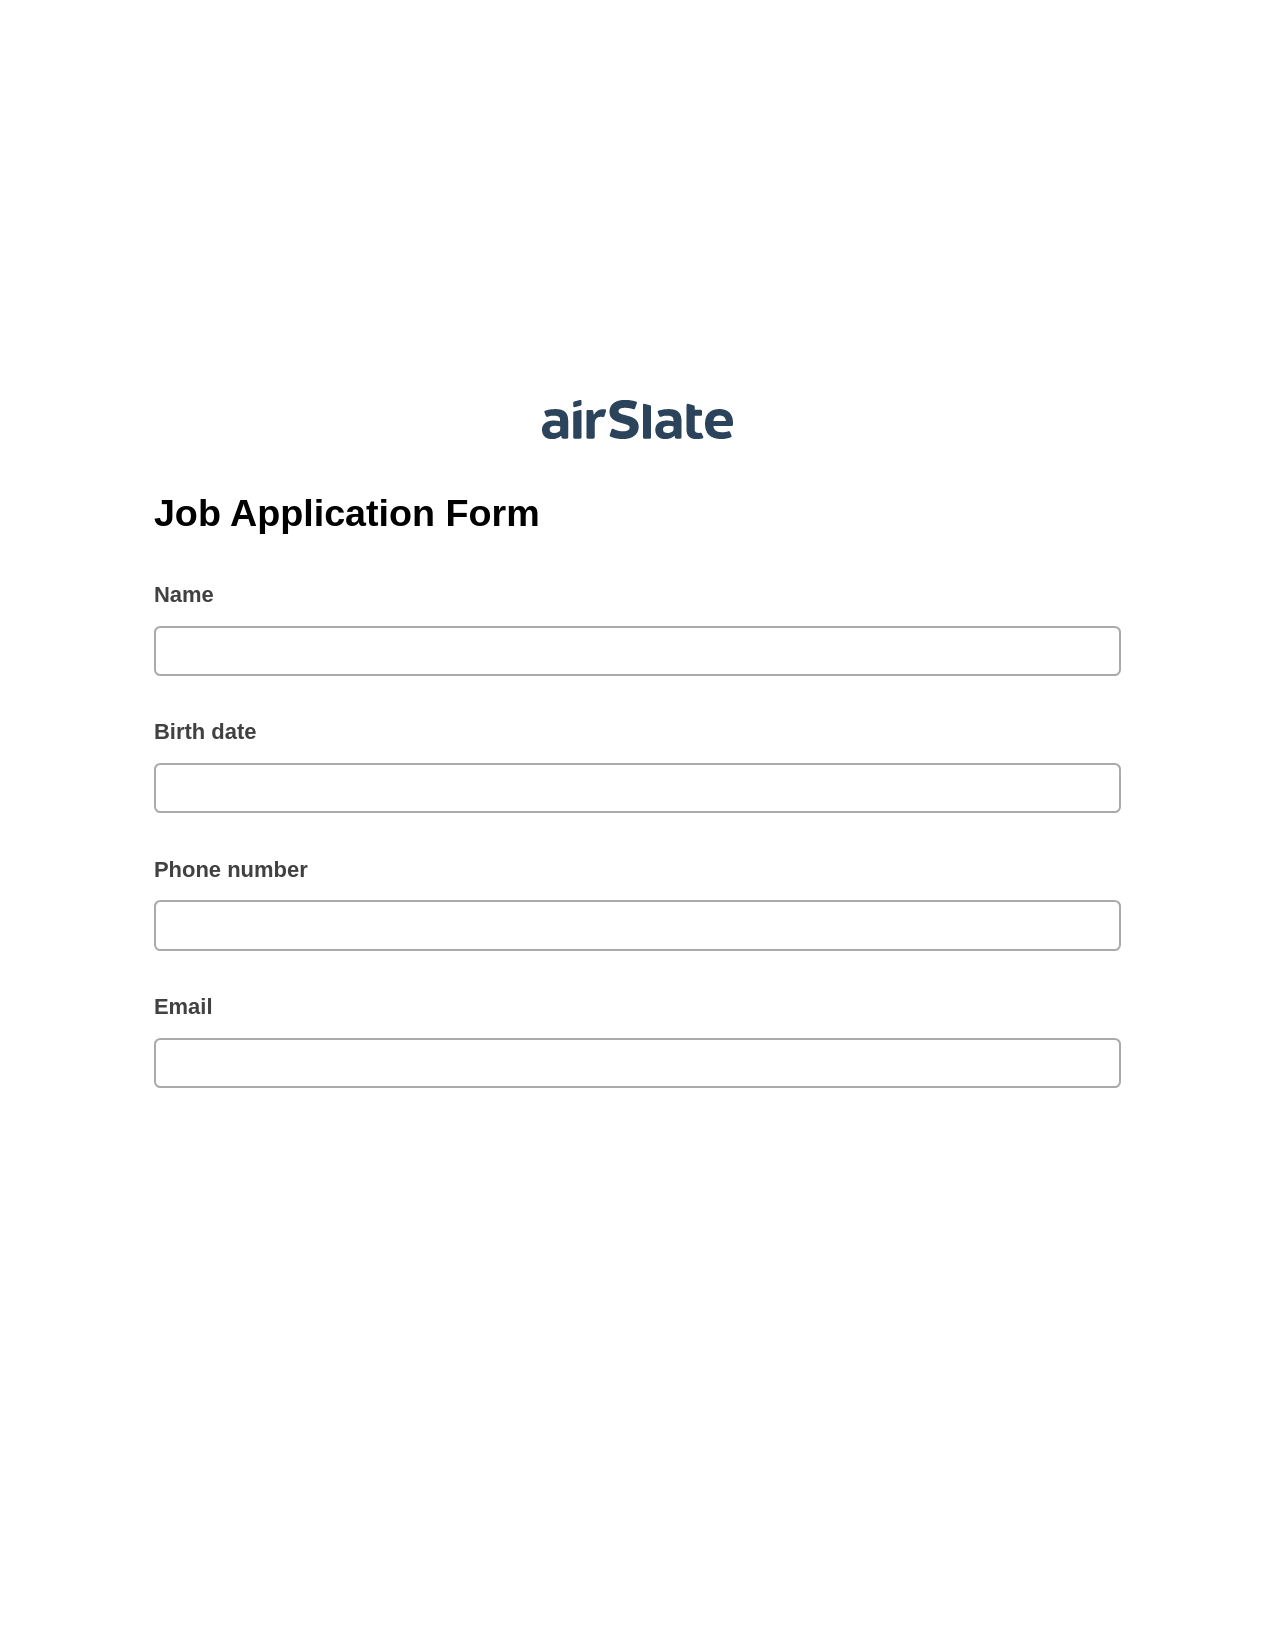 Job Application Form Pre-fill Dropdown from Airtable, Webhook Bot, OneDrive Bot